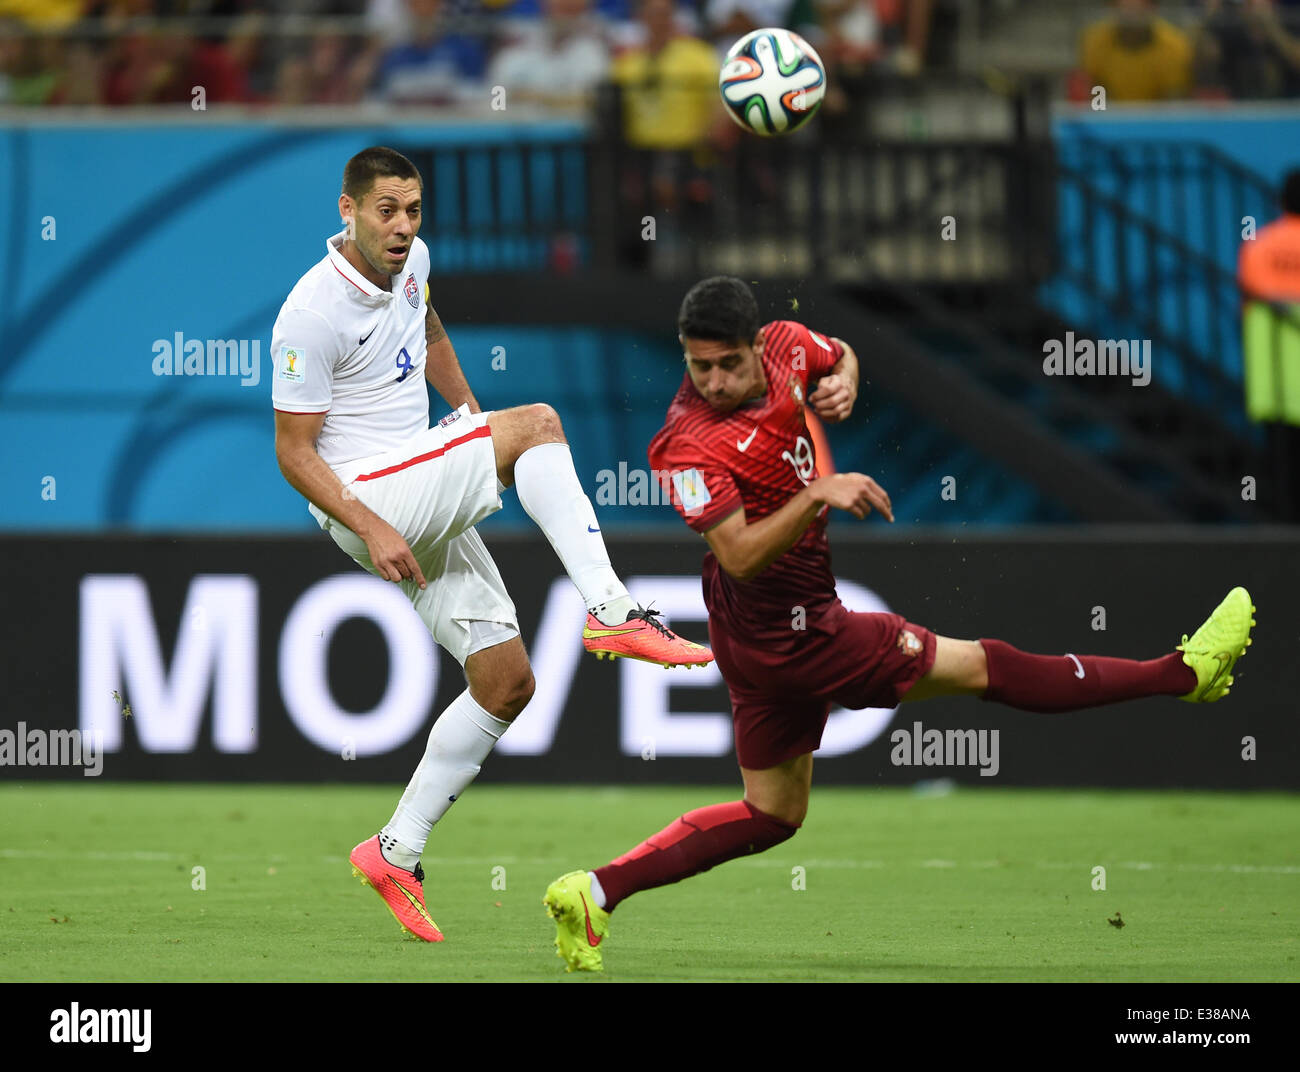 Manaus, Brazil. 22nd June, 2014. Andre Almeida of Portugal in action against Clint Dempsey (L) of USA during the FIFA World Cup 2014 group G preliminary round match between the USA and Portugal at the Arena Amazonia Stadium in Manaus, Brazil, 22 June 2014. Photo: Marius Becker/dpa/Alamy Live News Stock Photo